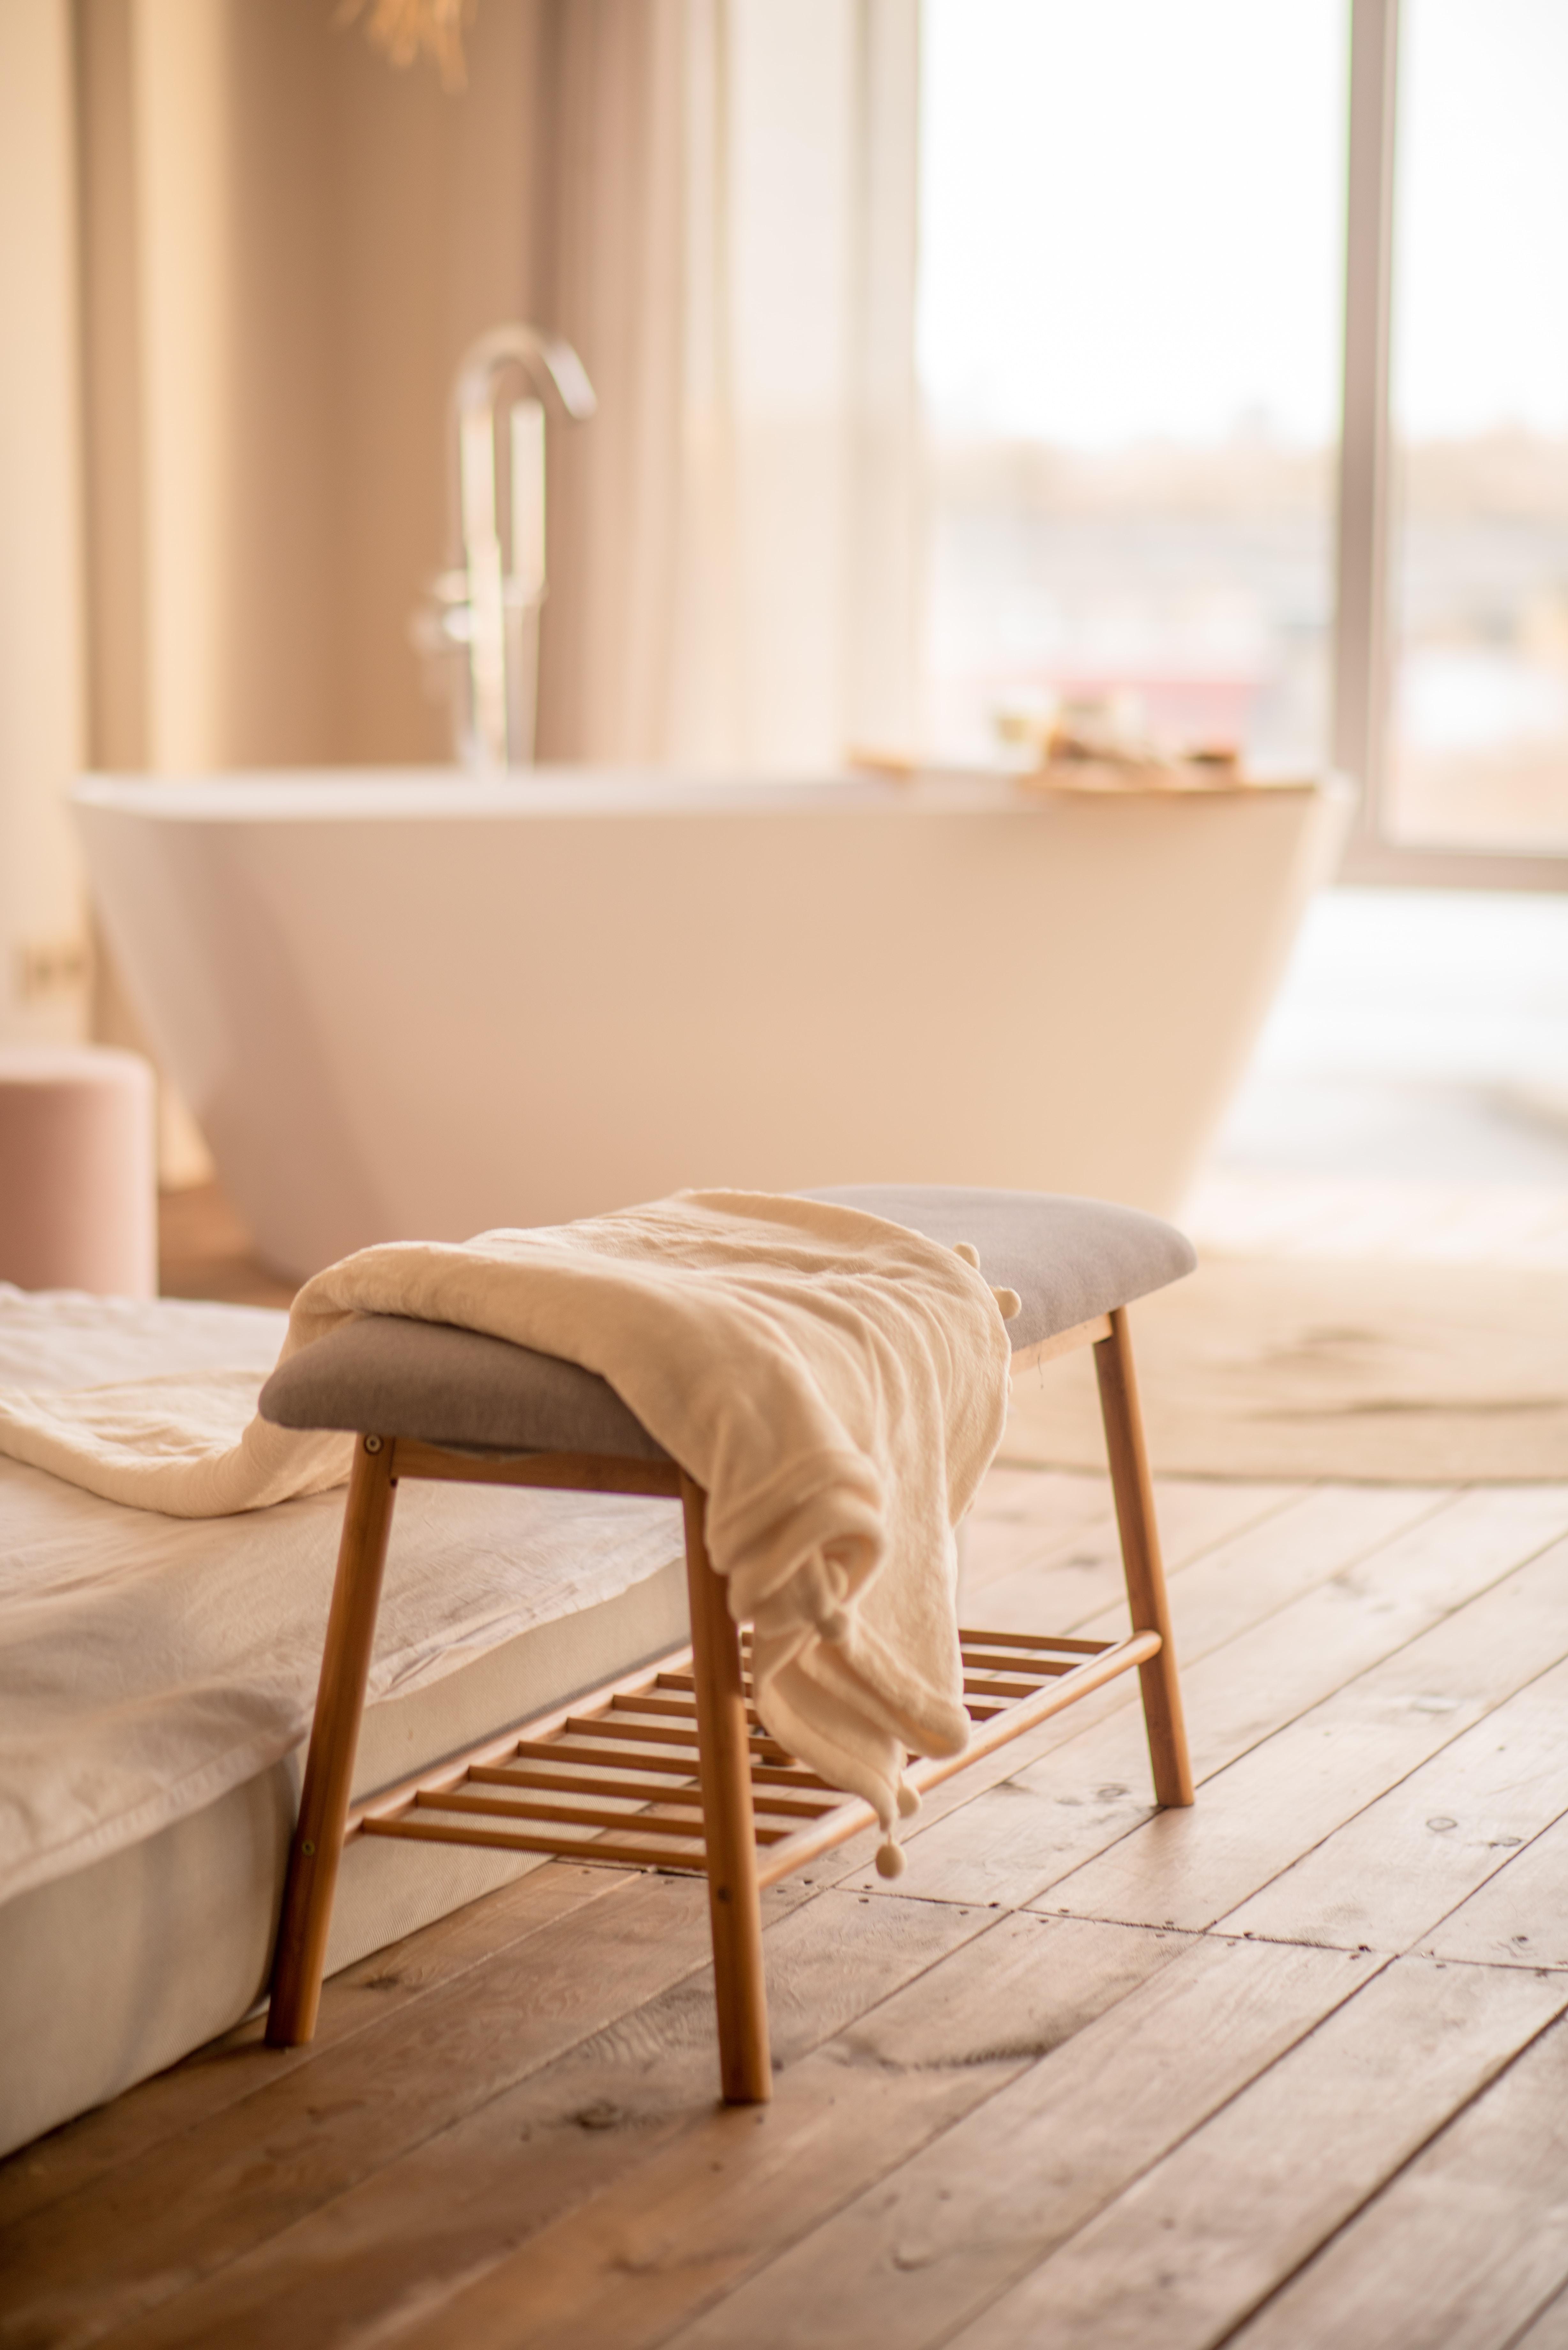 The big revamp: Bring your bathroom into the 21st century